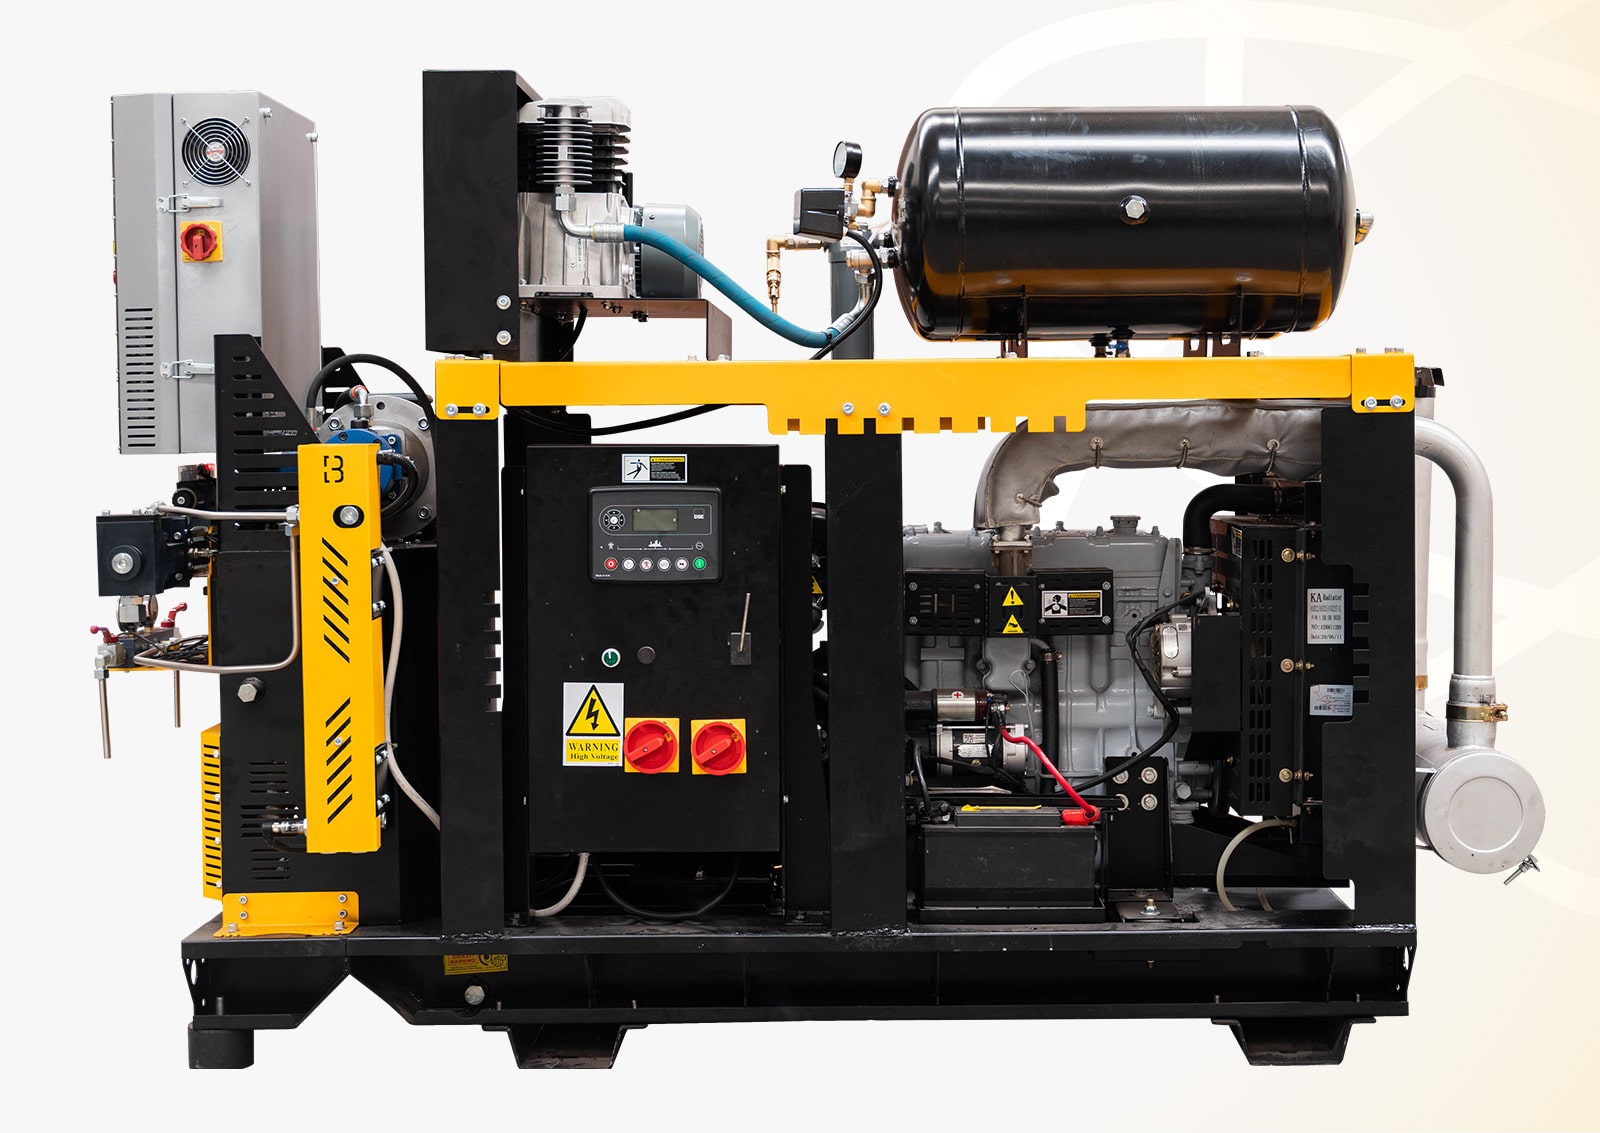 The G series polyurethane machine produced by our brand is a 5th generation hydraulic machine.